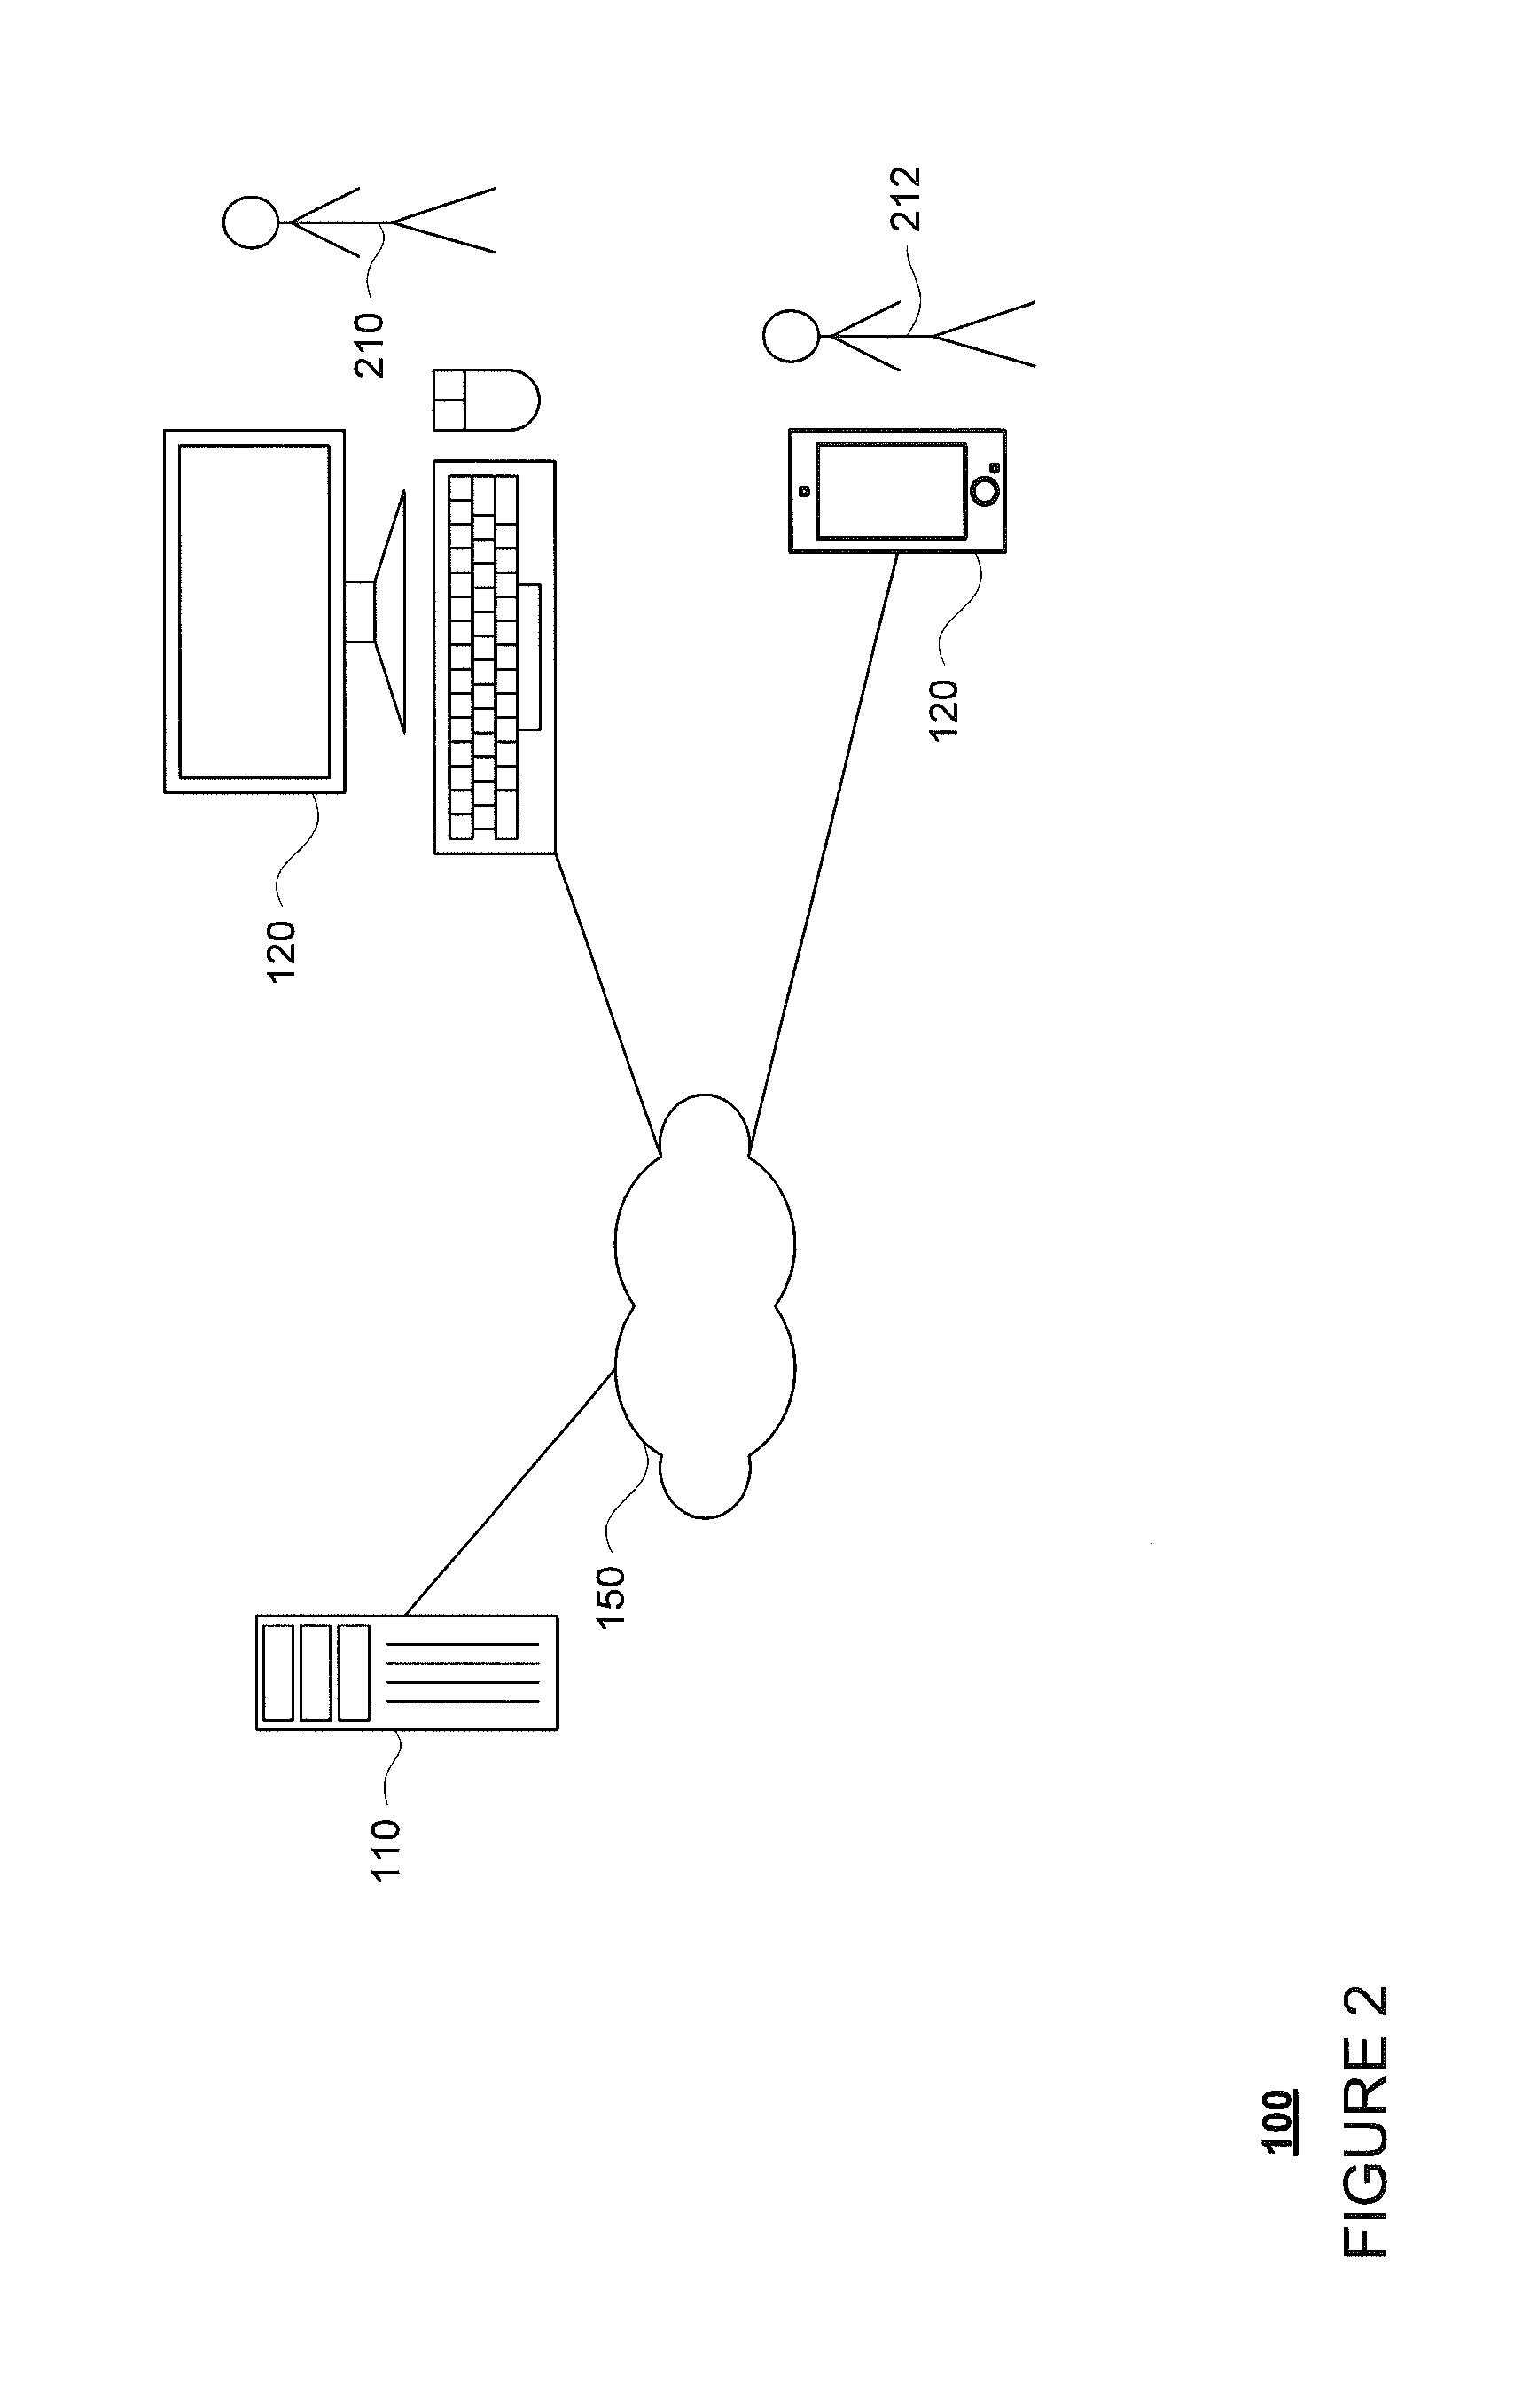 System and method for indicating security